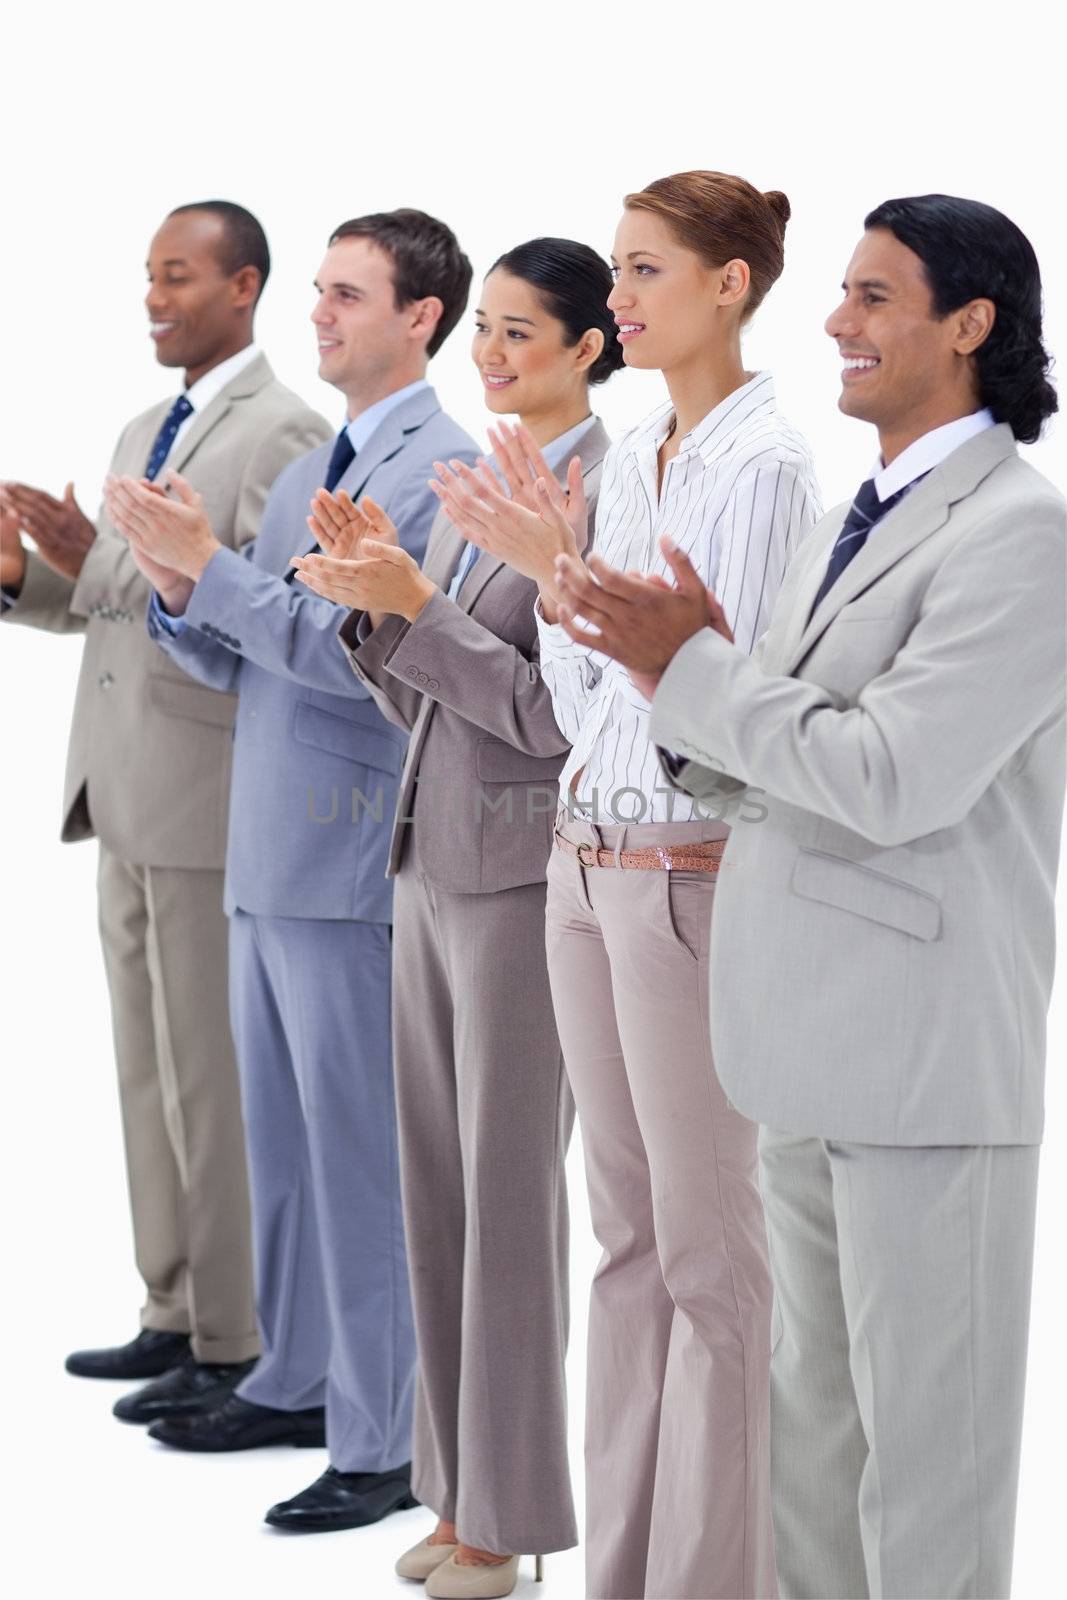 Business people smiling and applauding  by Wavebreakmedia